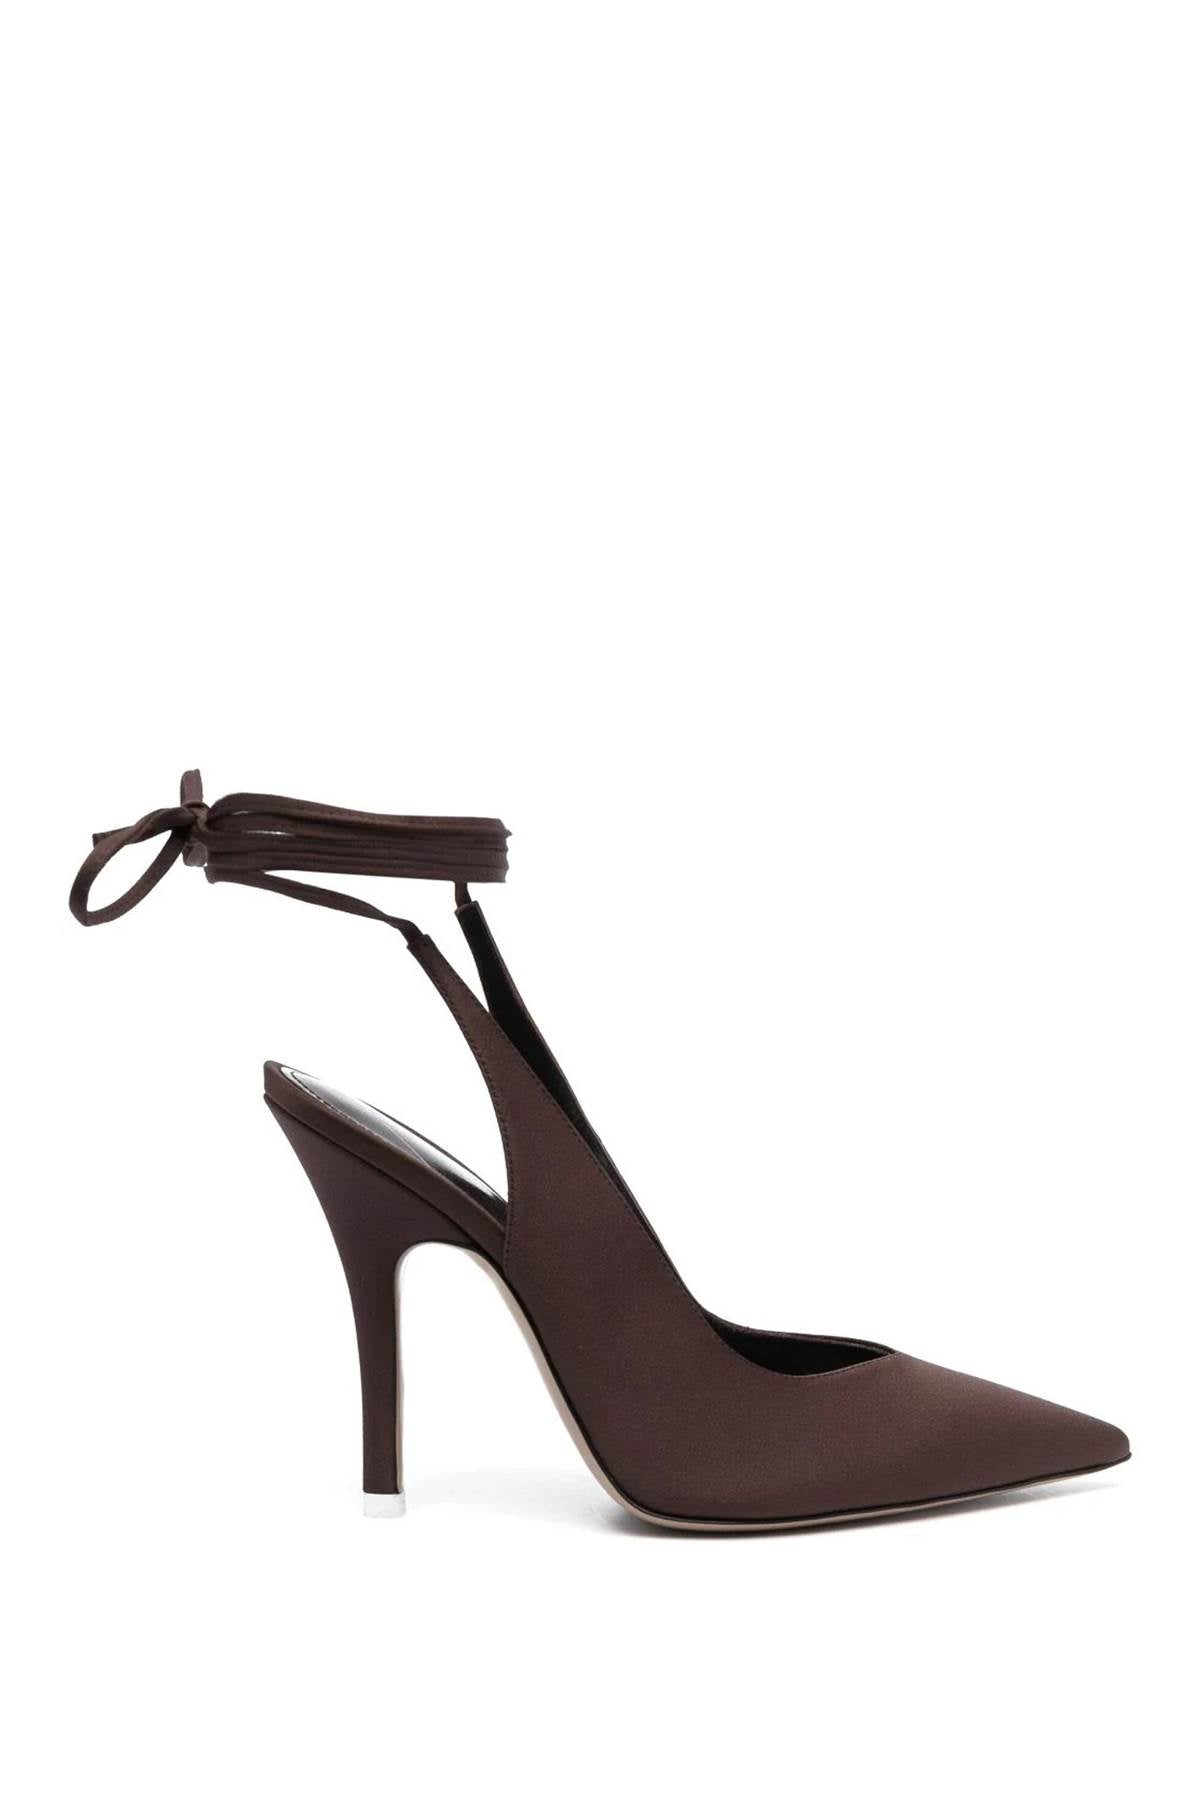 Venus Slingback Pumps in Brown - FW23 for Women by The Attico